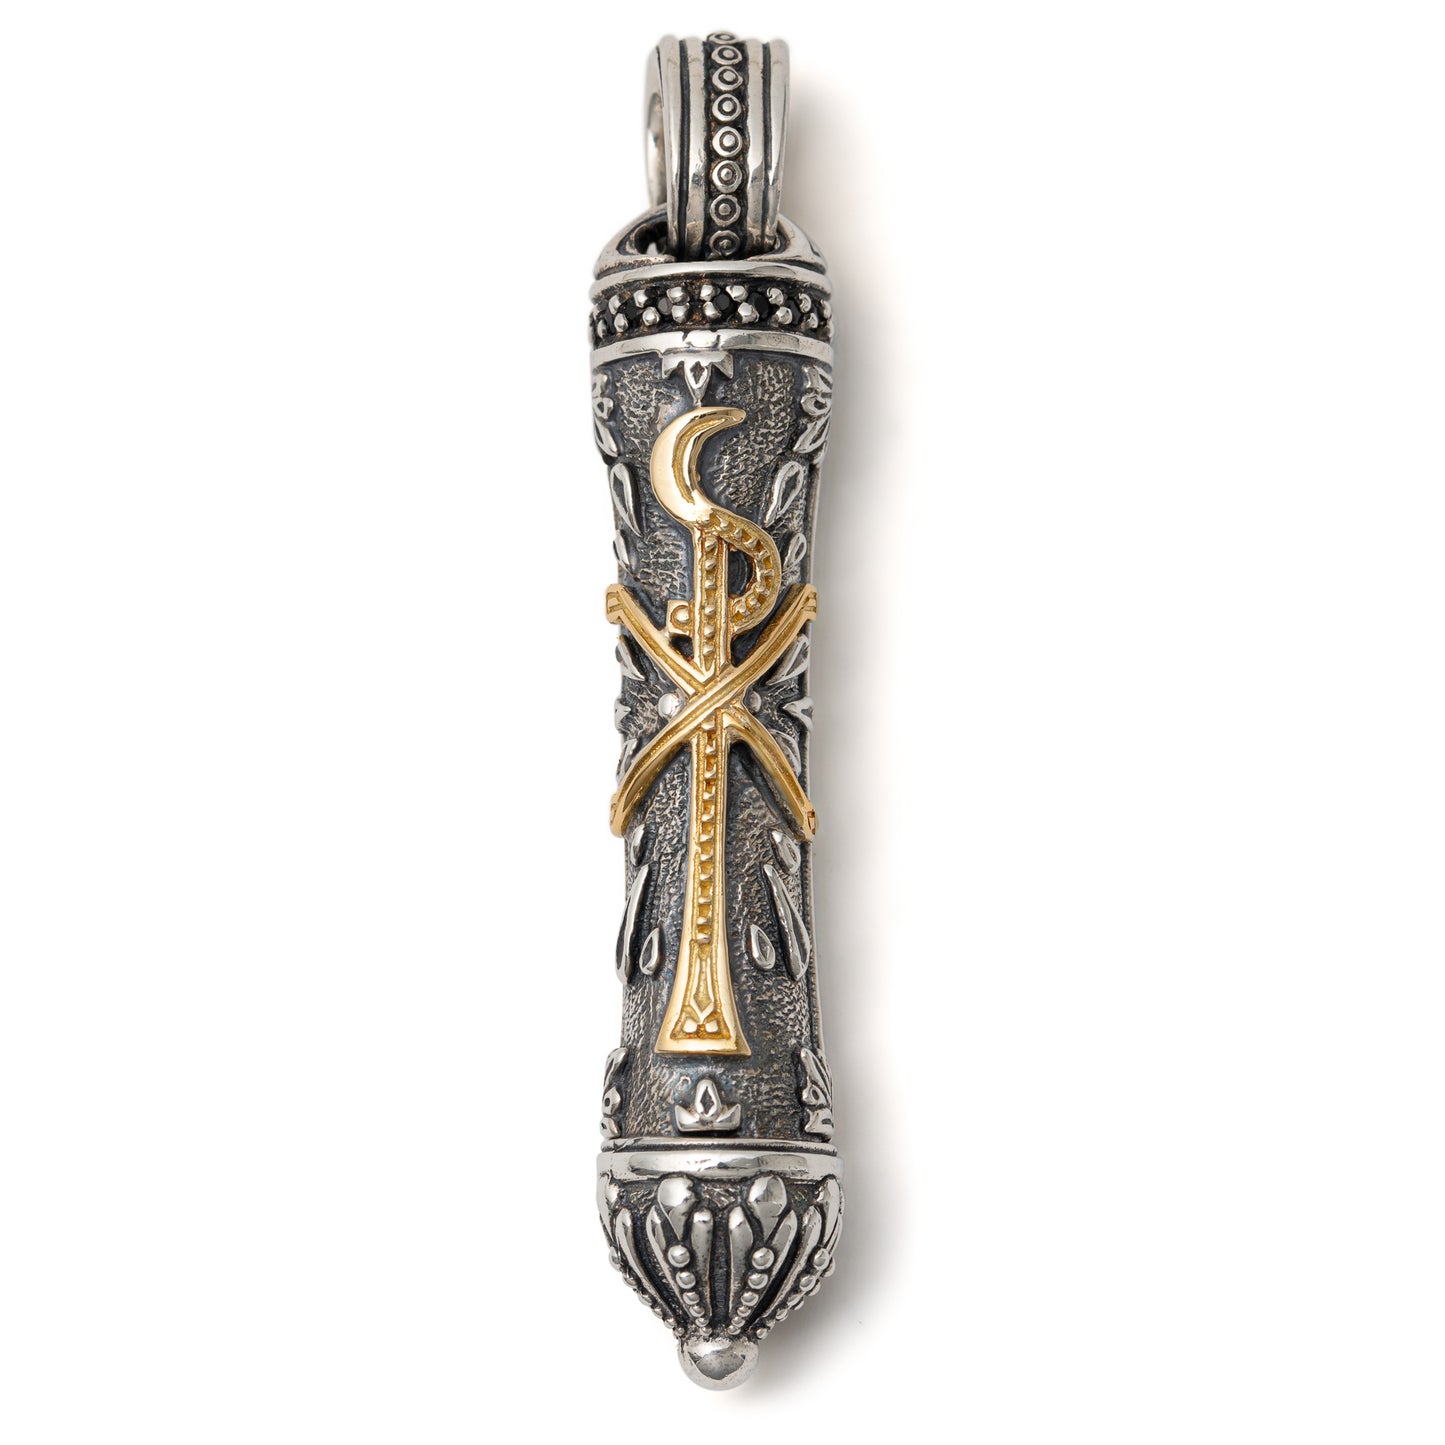 Konstantino Men's Sterling Silver, 18K Gold Spinal Scroll, Stavros Collection